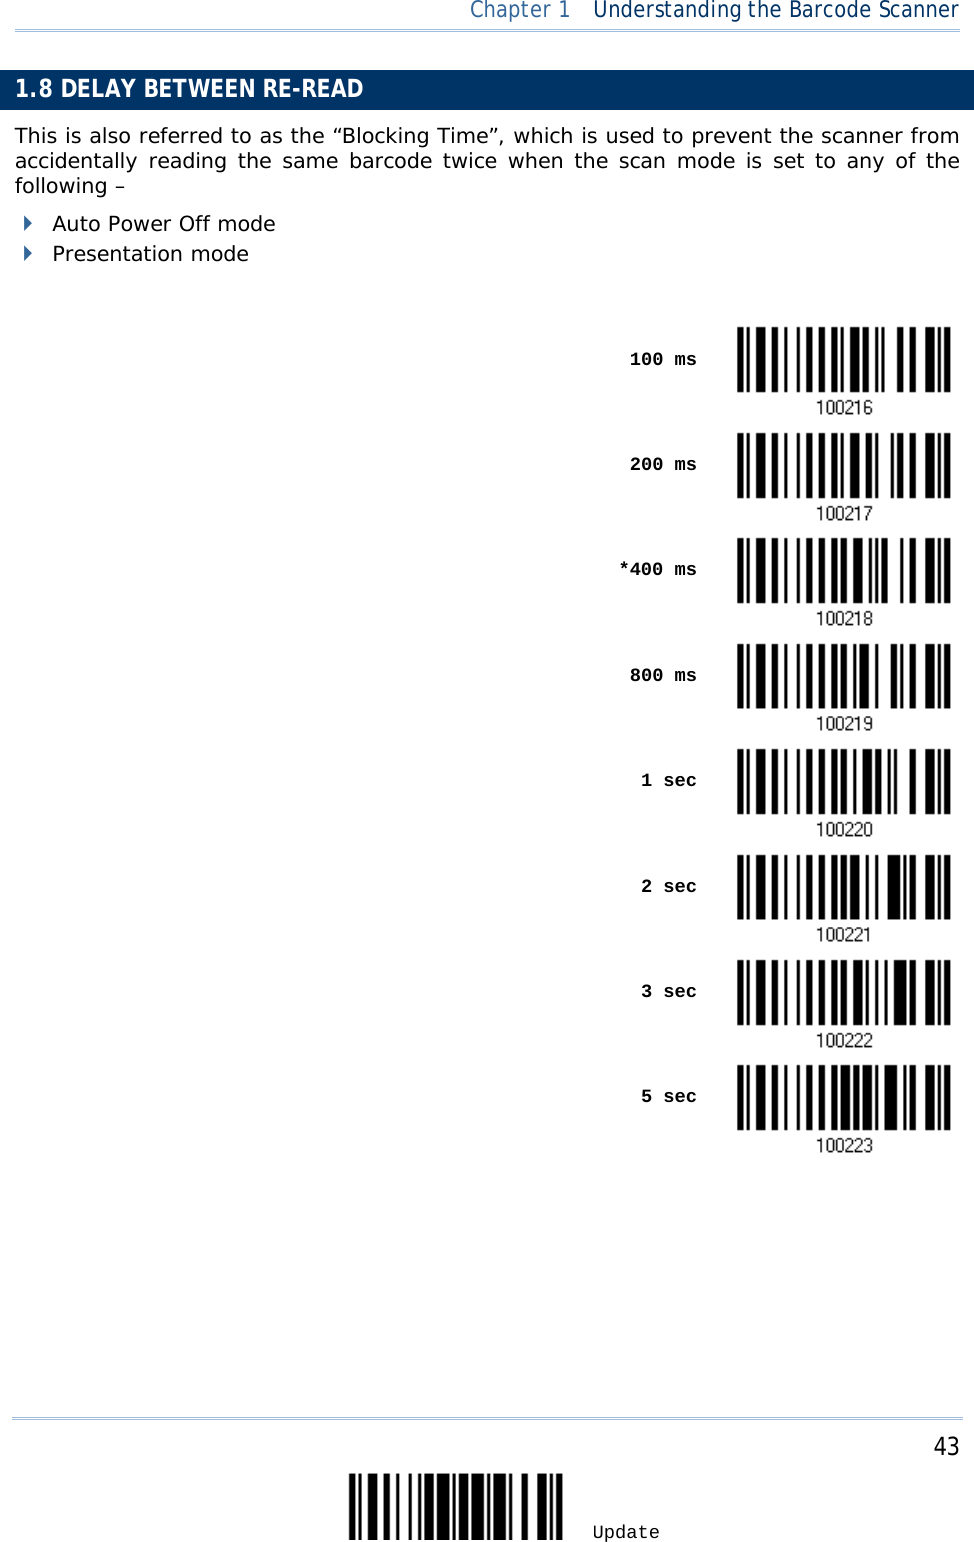  Chapter 1  Understanding the Barcode Scanner  1.8 DELAY BETWEEN RE-READ This is also referred to as the “Blocking Time”, which is used to prevent the scanner from accidentally reading the same barcode twice when the scan mode is set to any of the following –   Auto Power Off mode  Presentation mode     100 ms     200 ms     *400 ms     800 ms     1 sec     2 sec     3 sec     5 sec        43 Update 